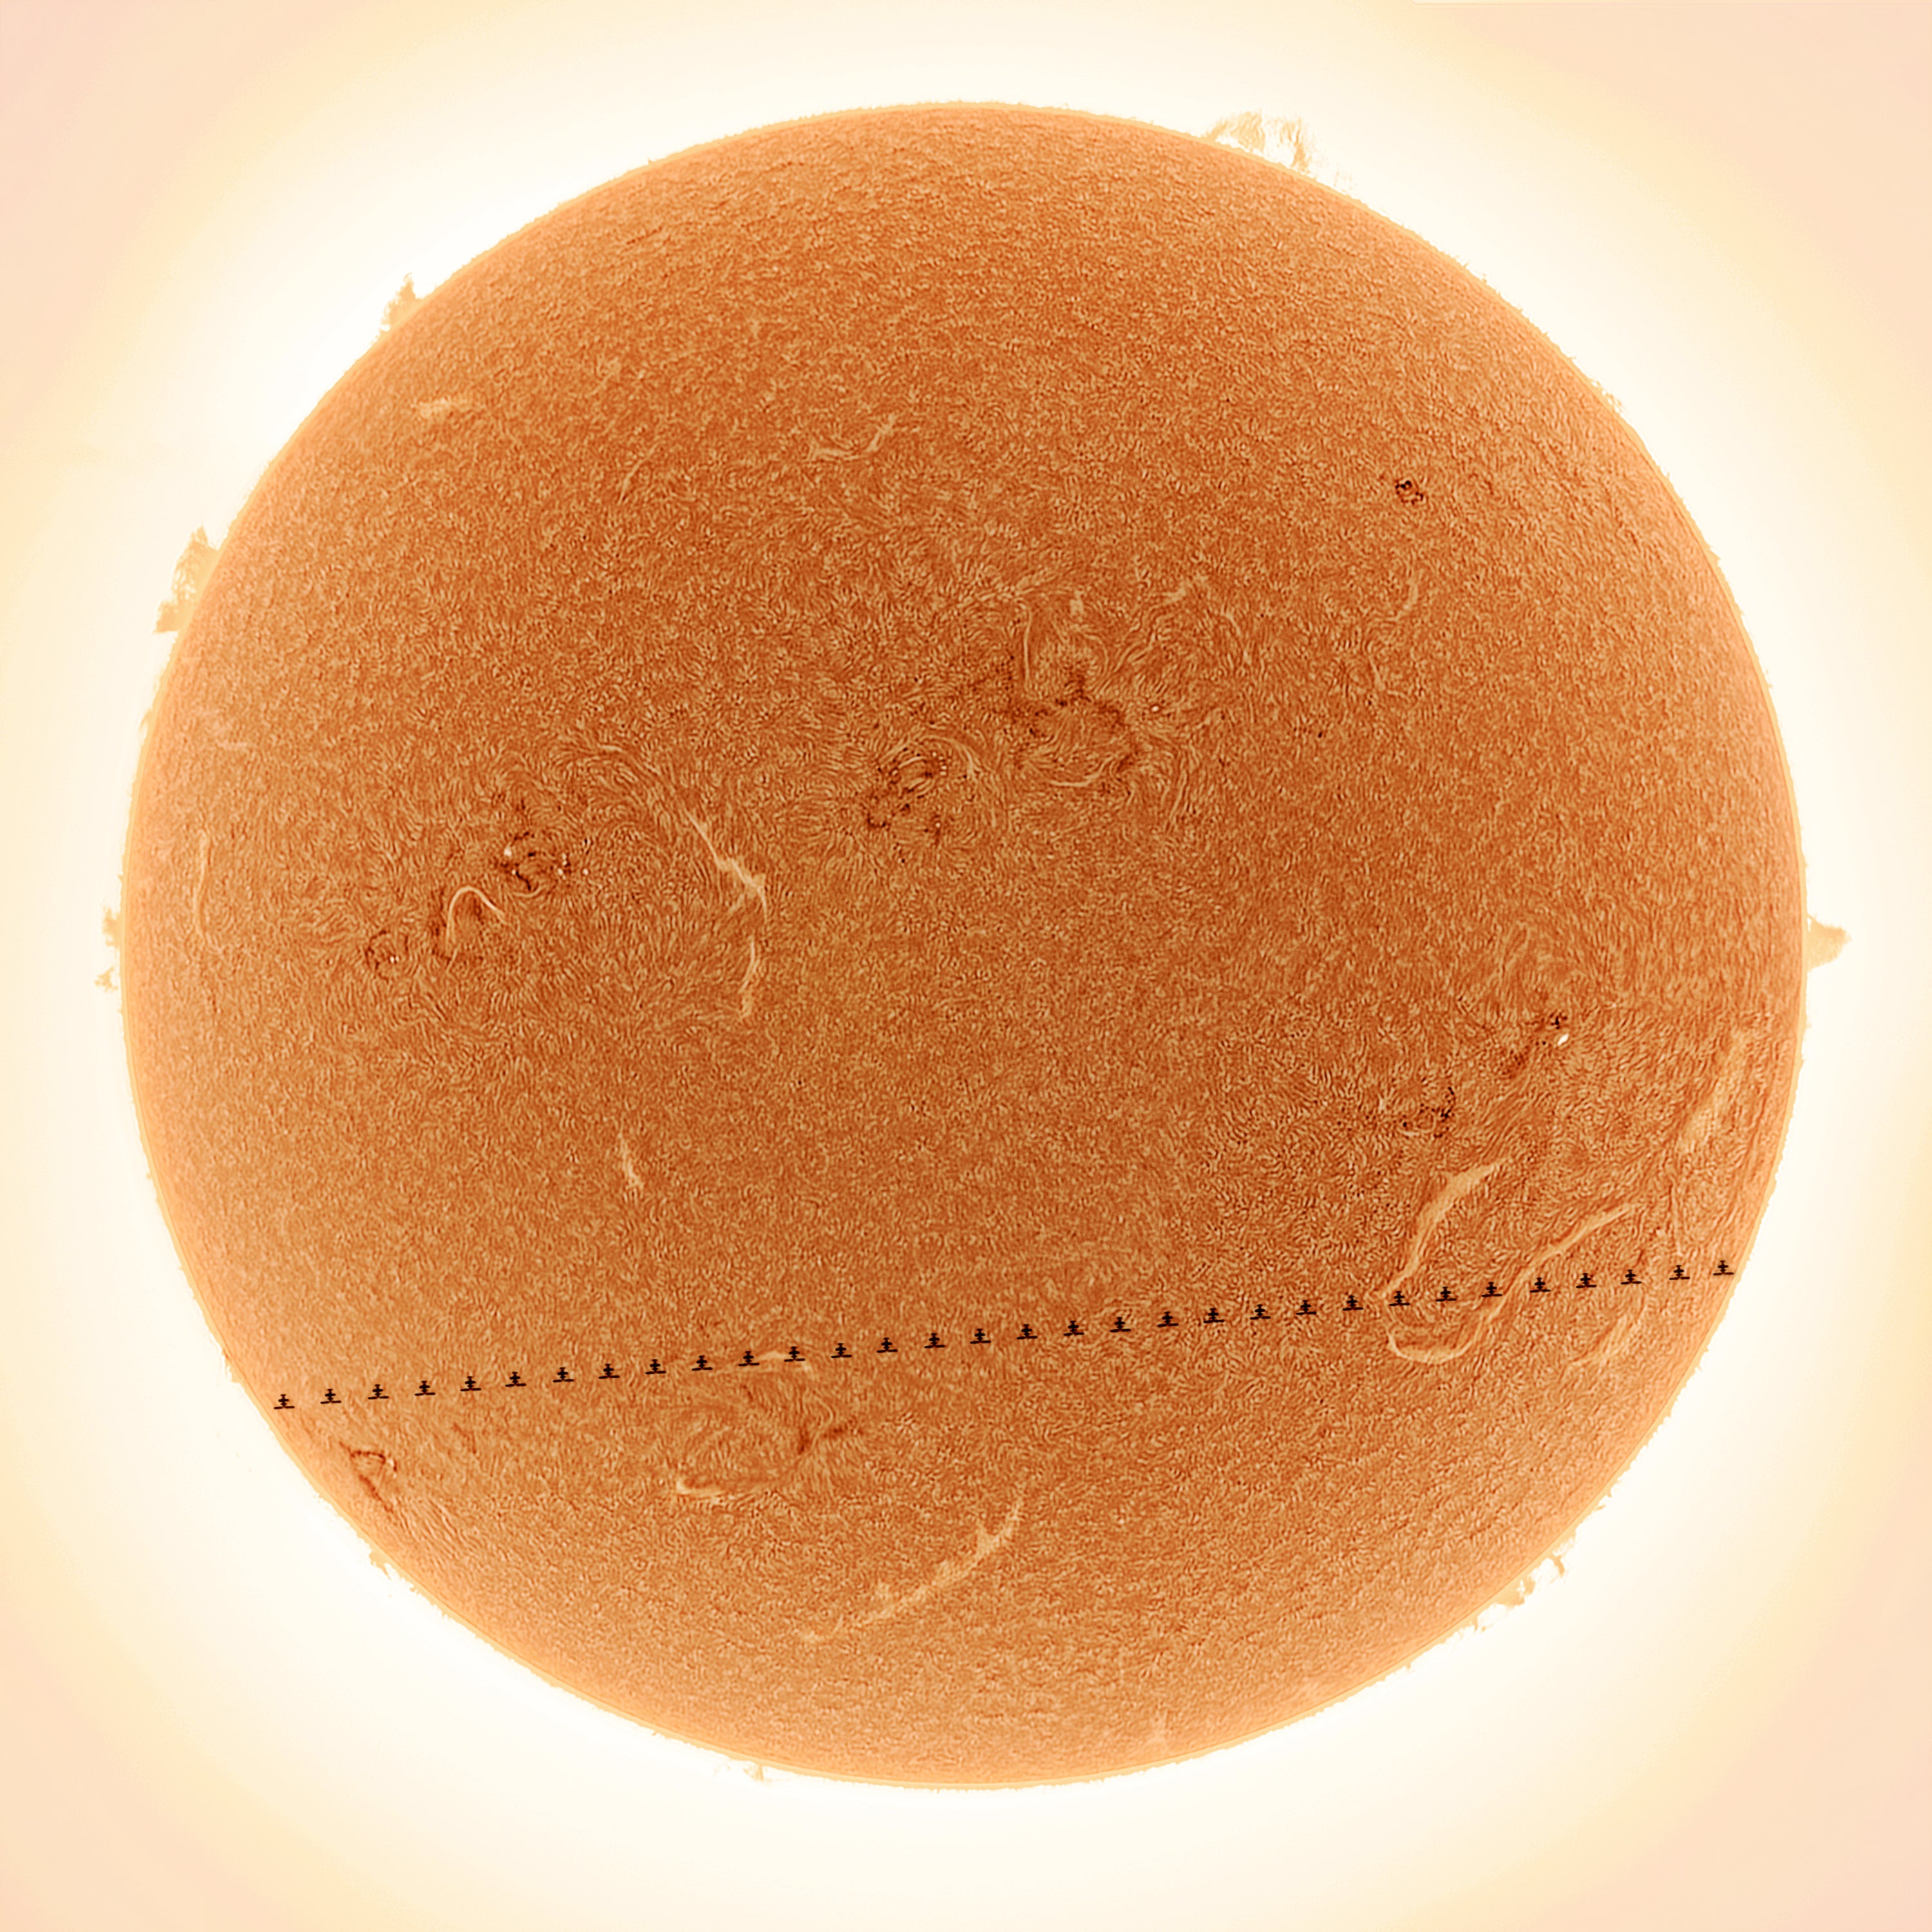 The Sun with the transit of the CSS in foreground. (Image: Letian Wang)